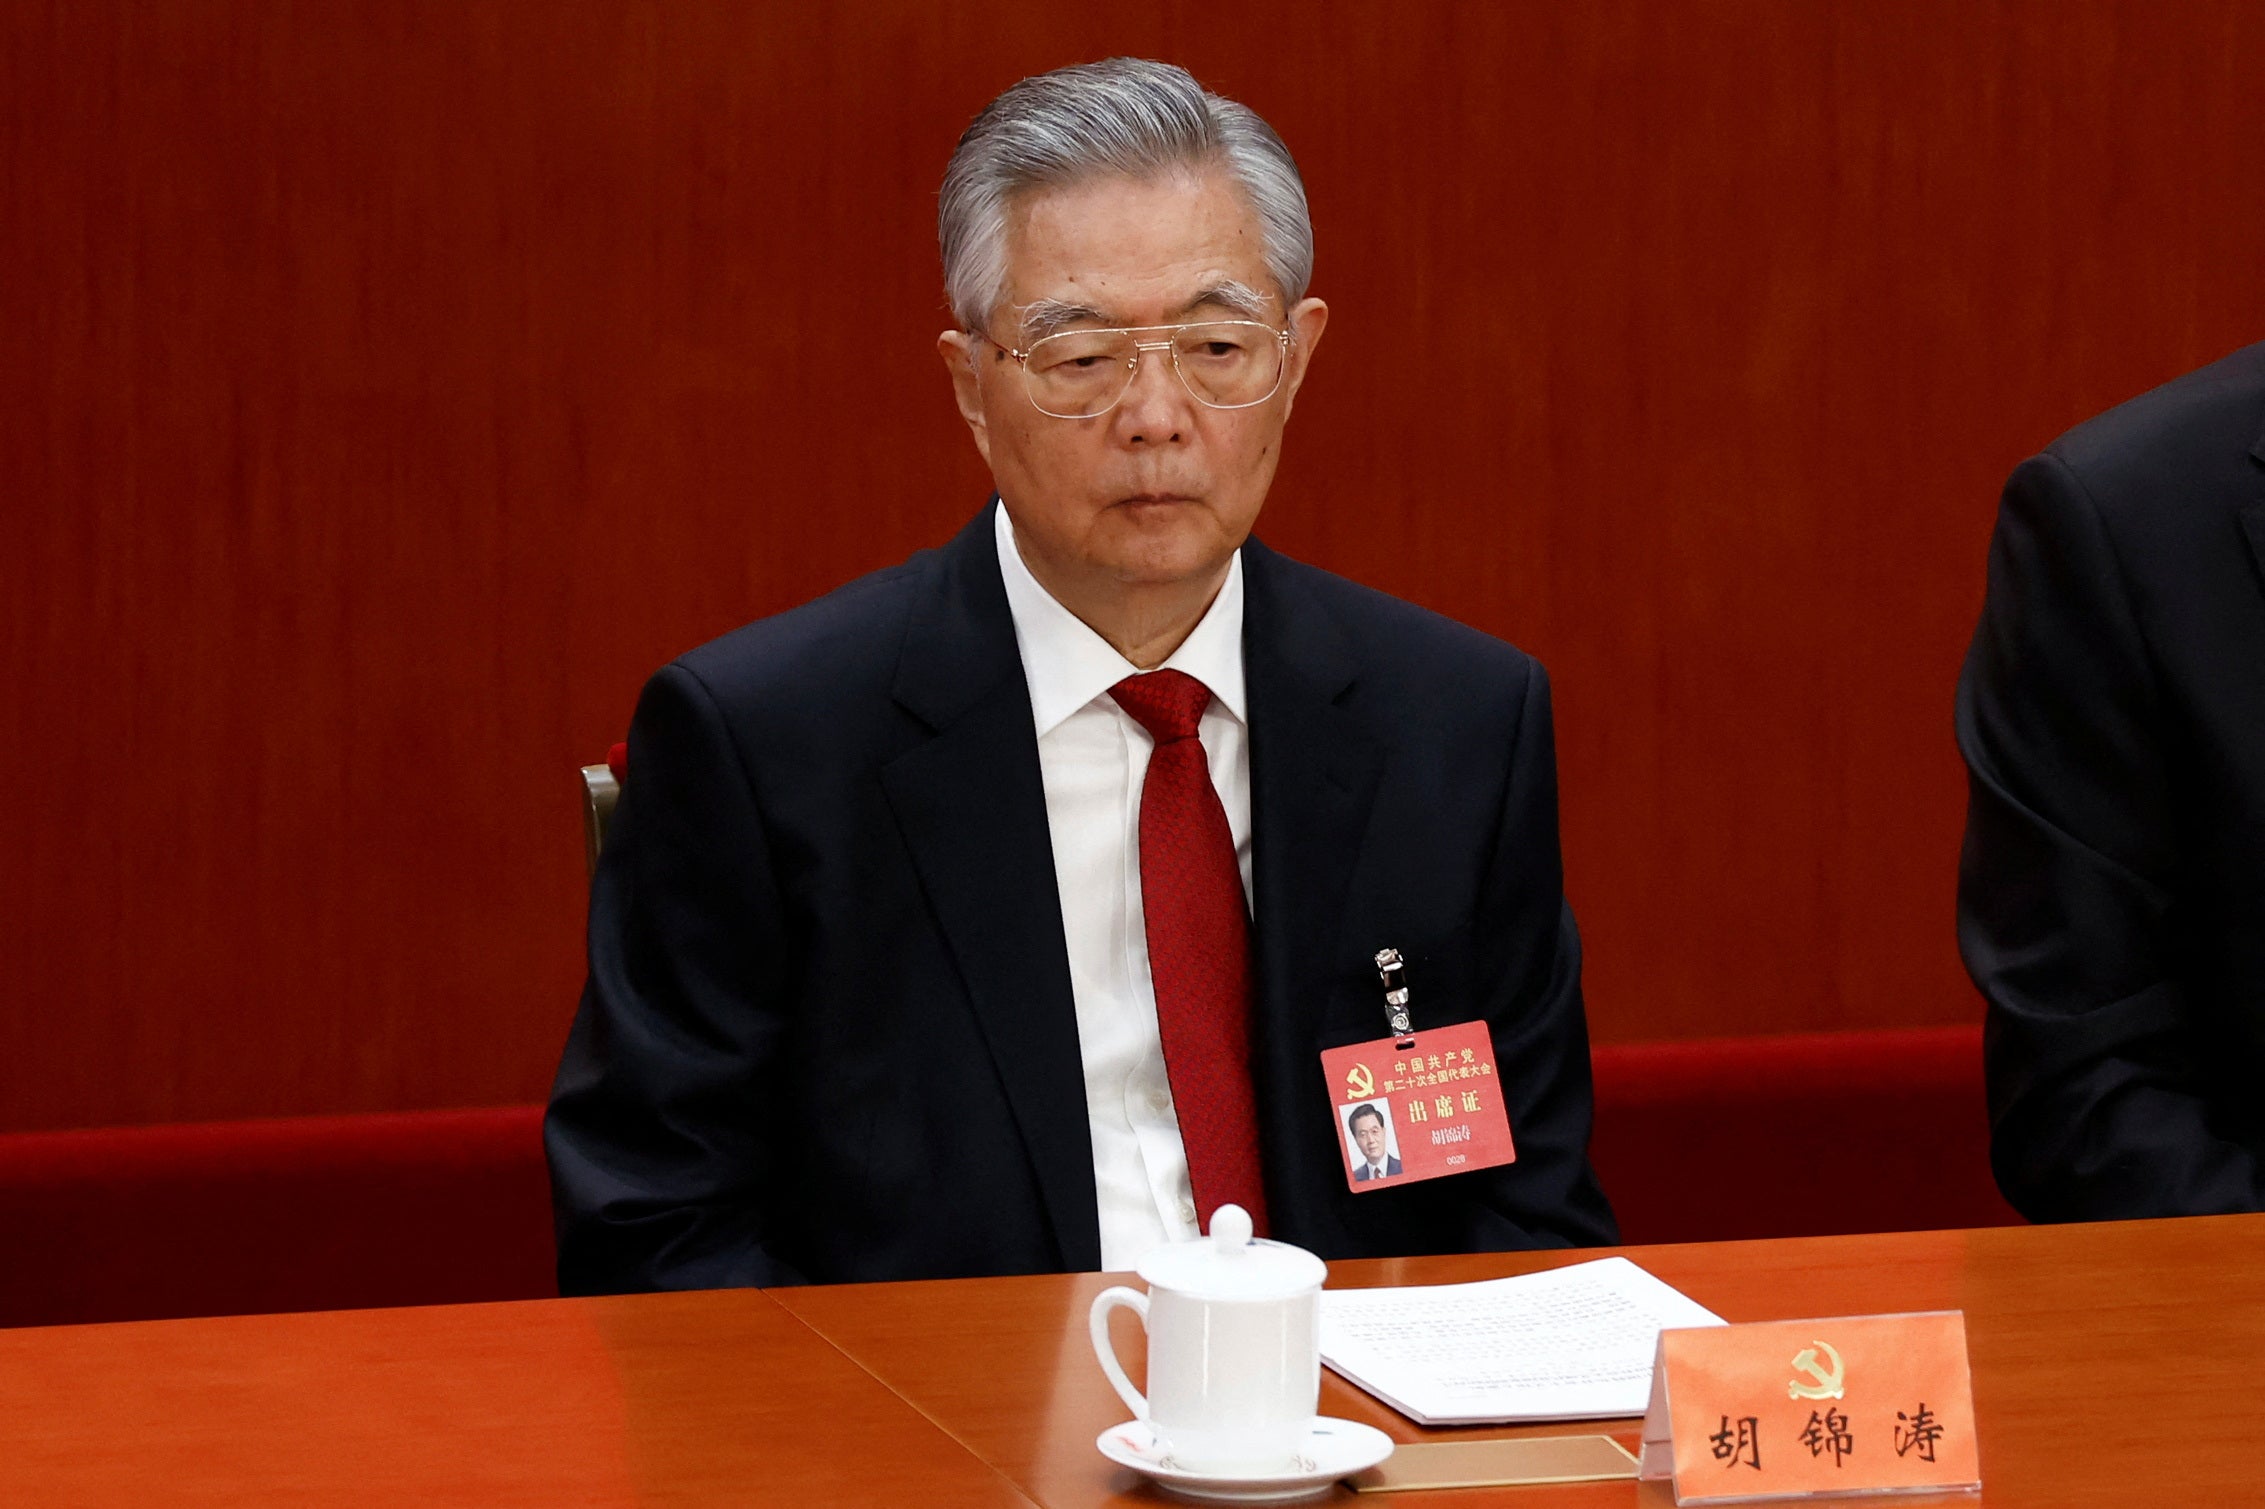 Former Chinese president Hu Jintao at the opening ceremony of the National Congress